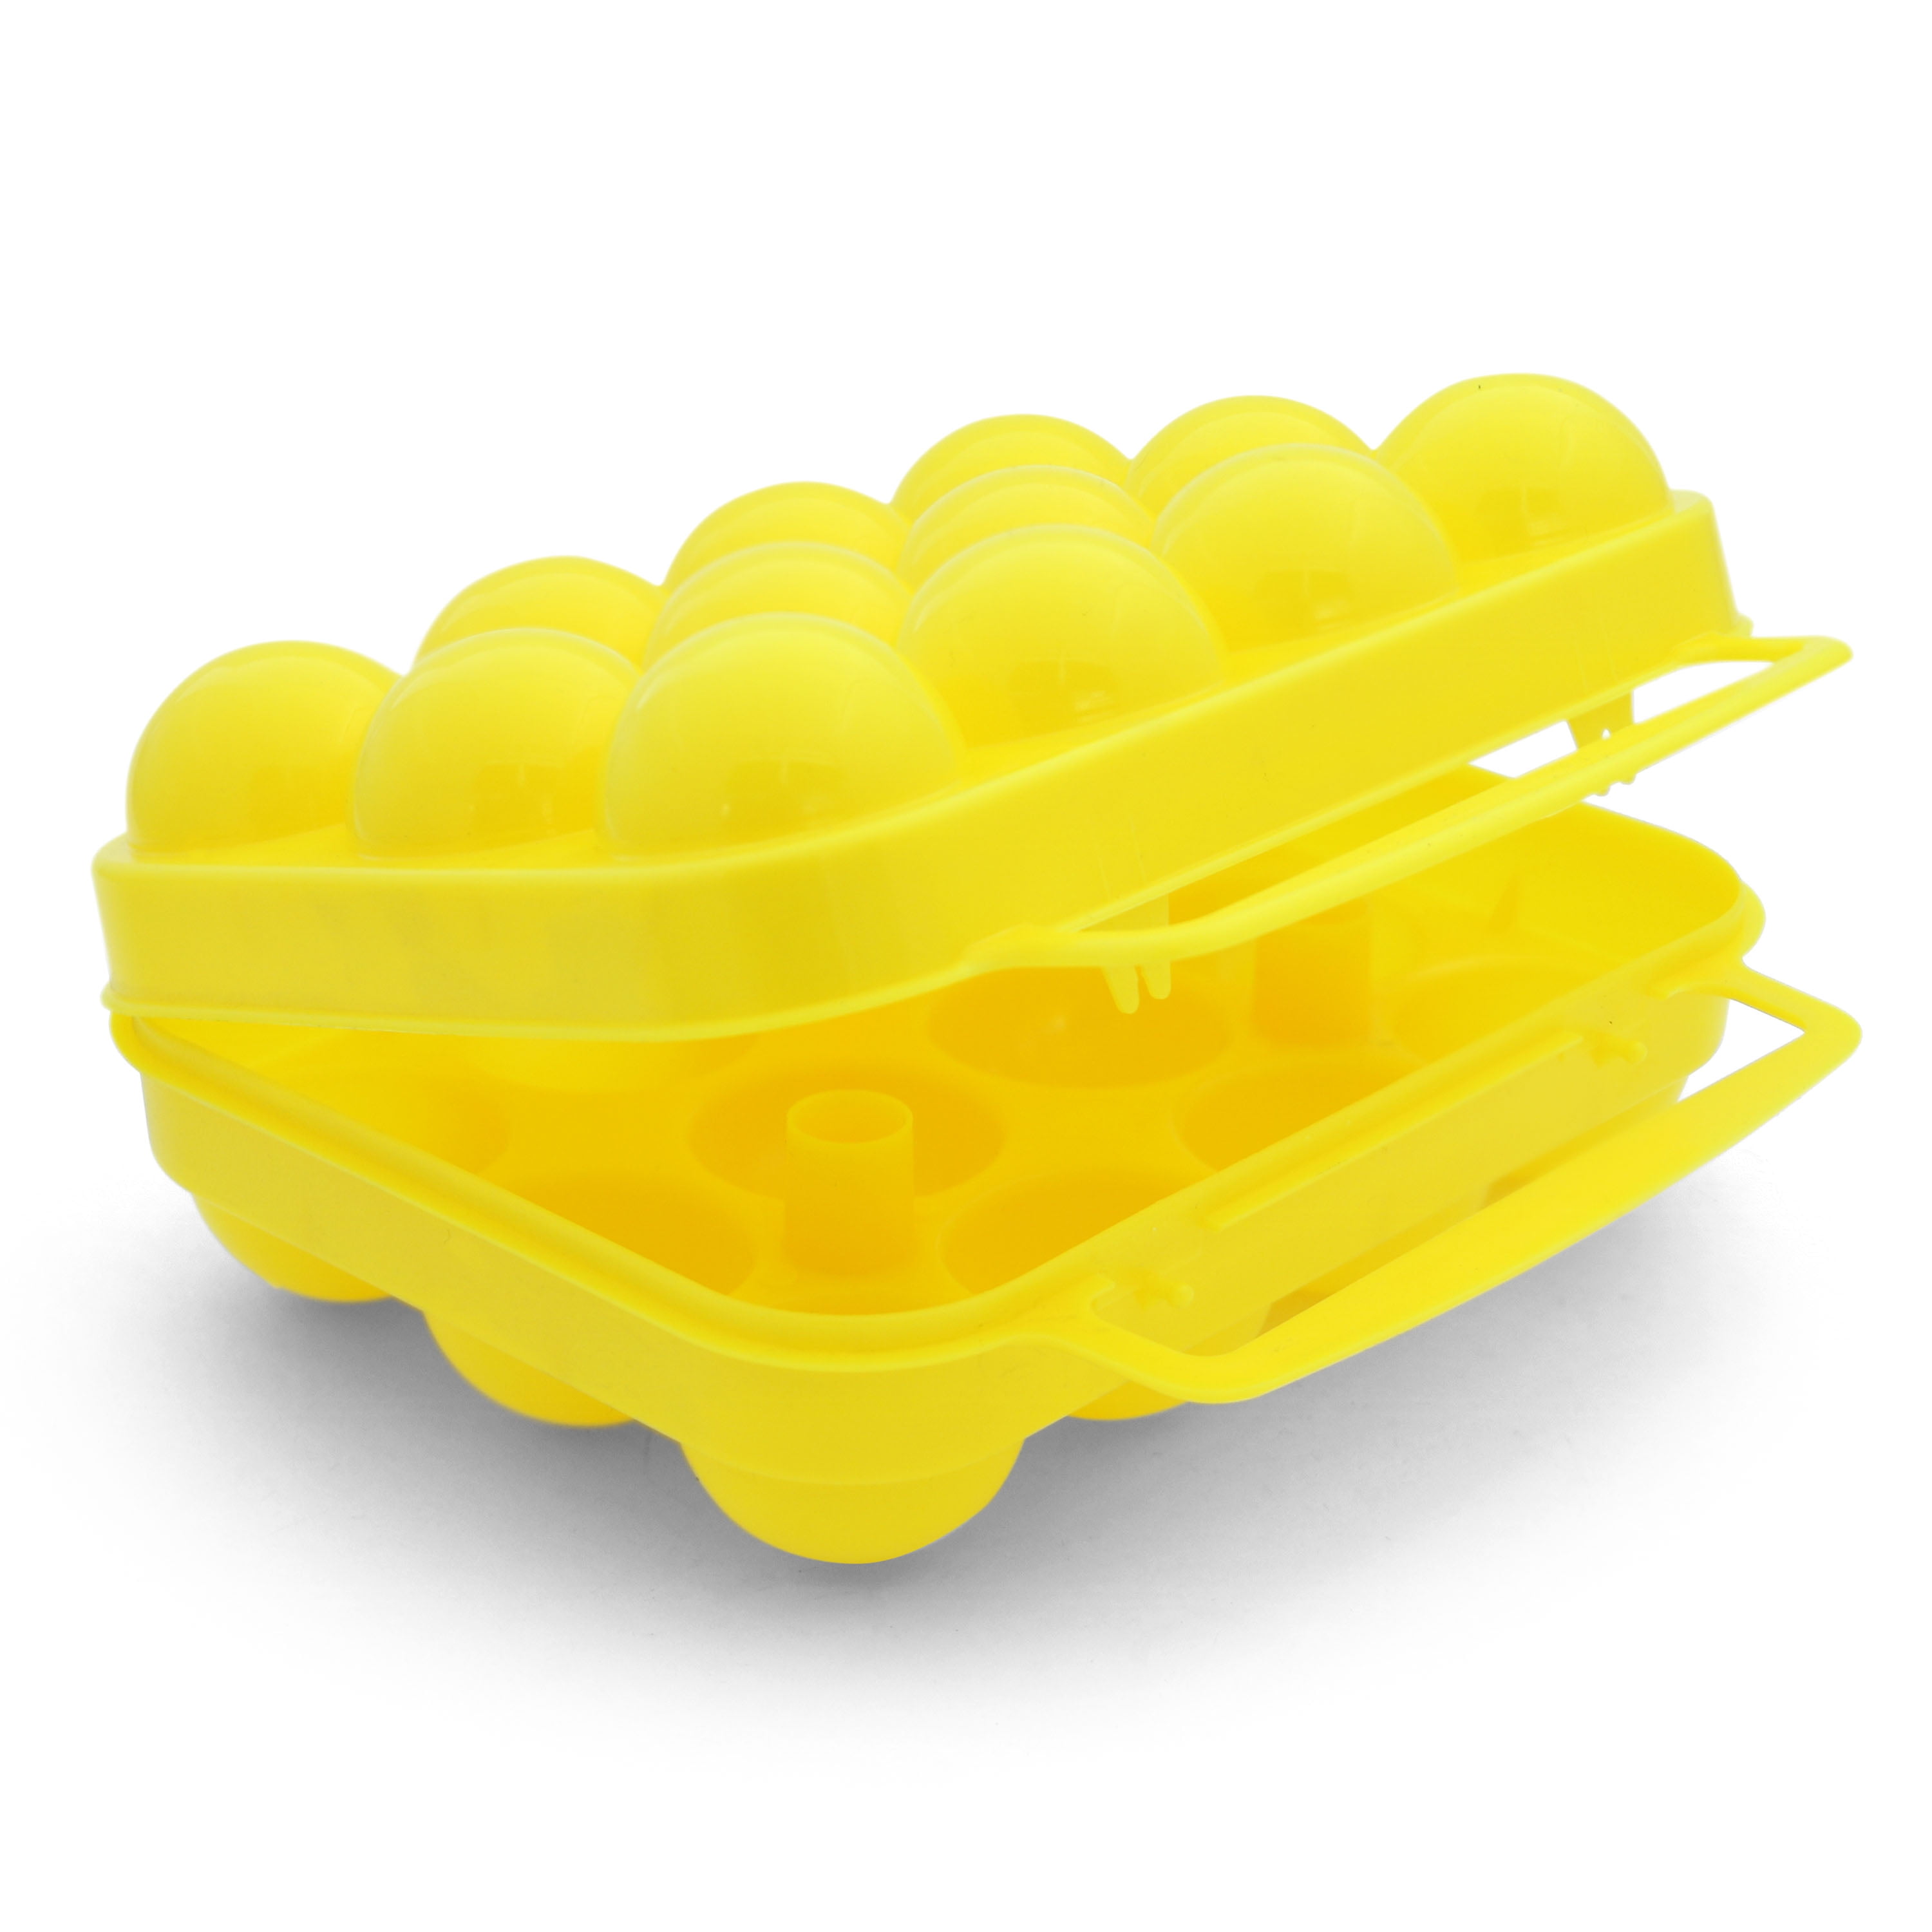 Egg Plastic Holder Container Folding Boxes Kitchen Refrigerator Homes Storage 